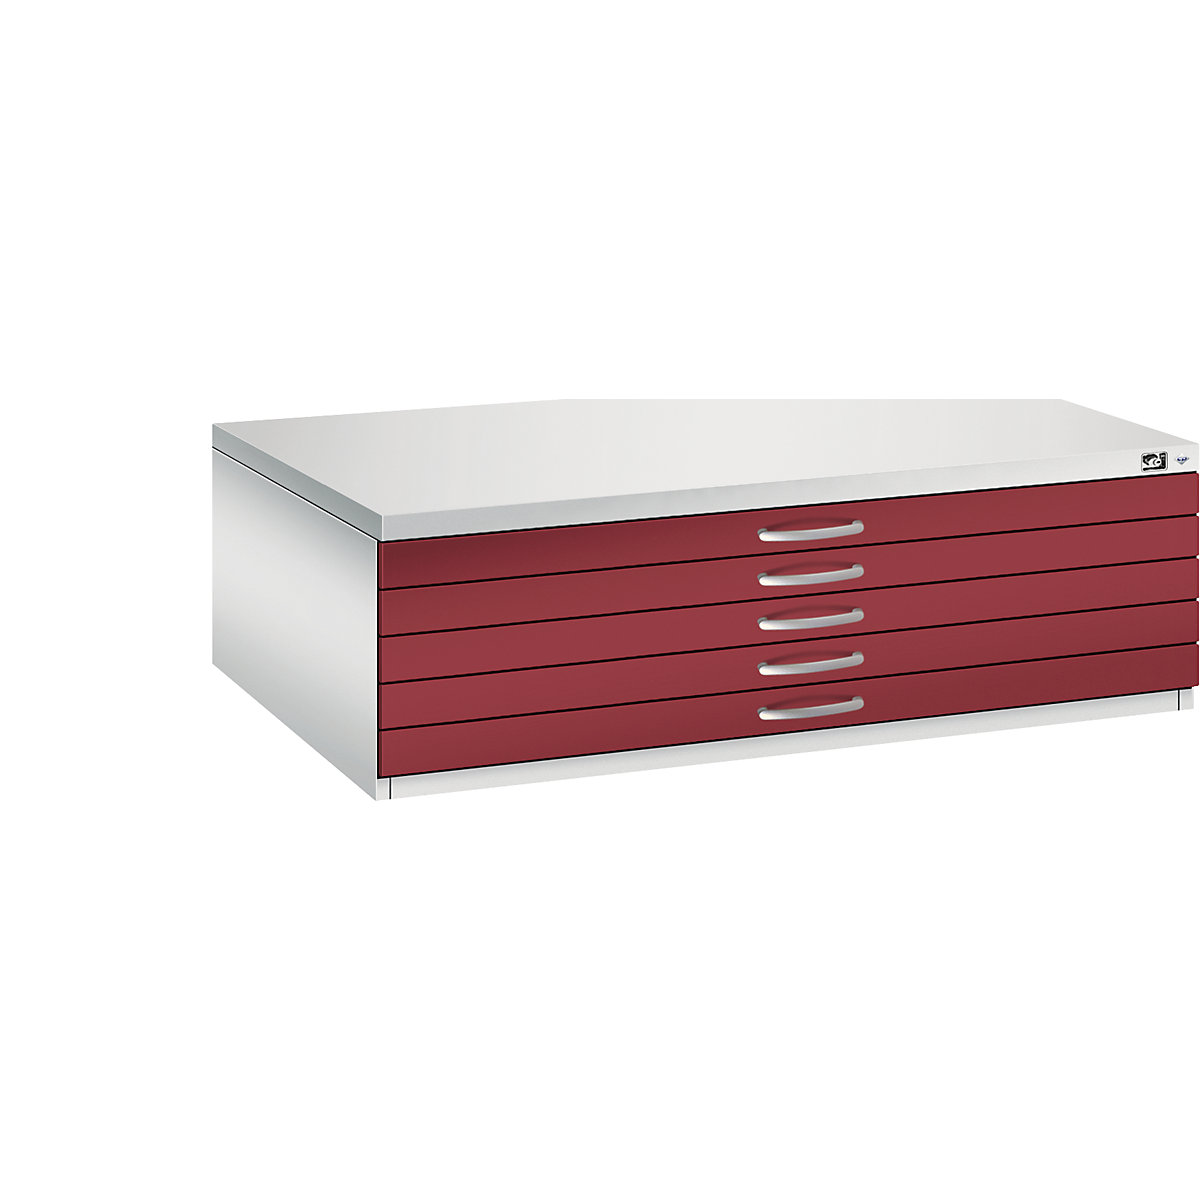 Drawing cabinet – C+P, A0, 5 drawers, height 420 mm, light grey / ruby red-19